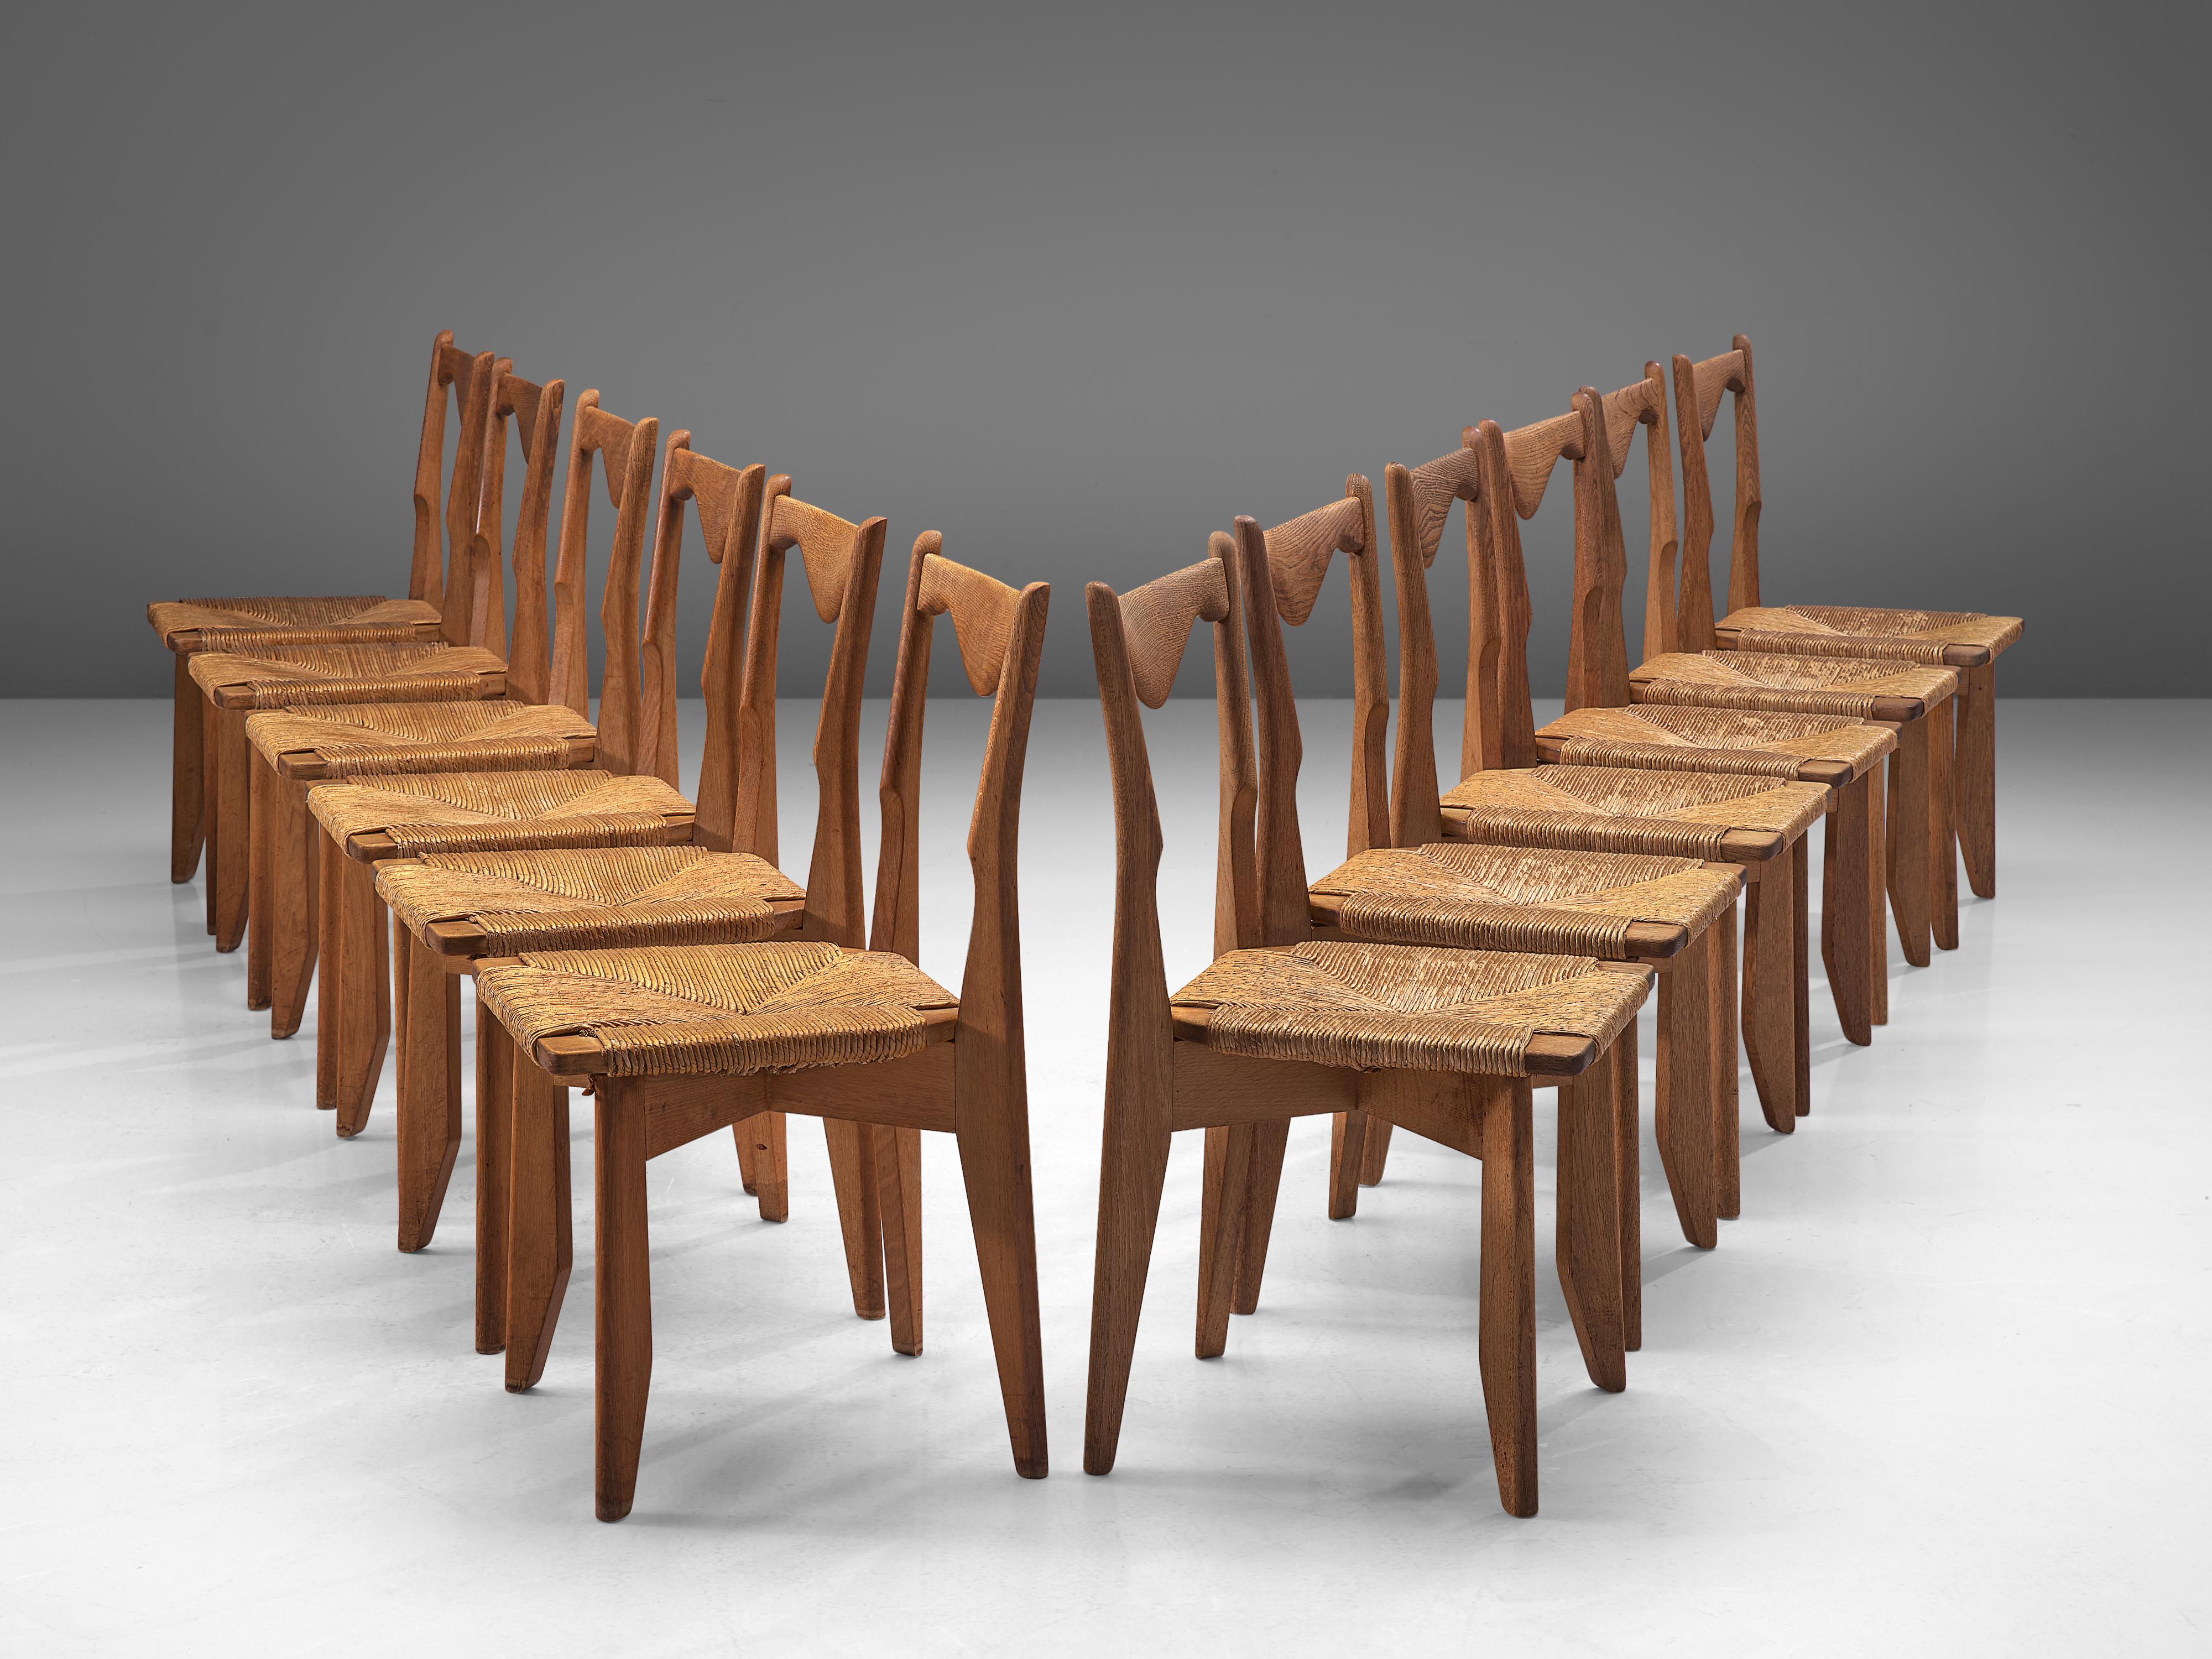 Guillerme & Chambron for Votre Maison, set of 10 dining chairs, oak, straw, France, 1960s

Set of 10 elegant dining chairs in solid oak by Guillerme and Chambron. These chairs show the characteristic frame of this French designer duo. Tapered legs